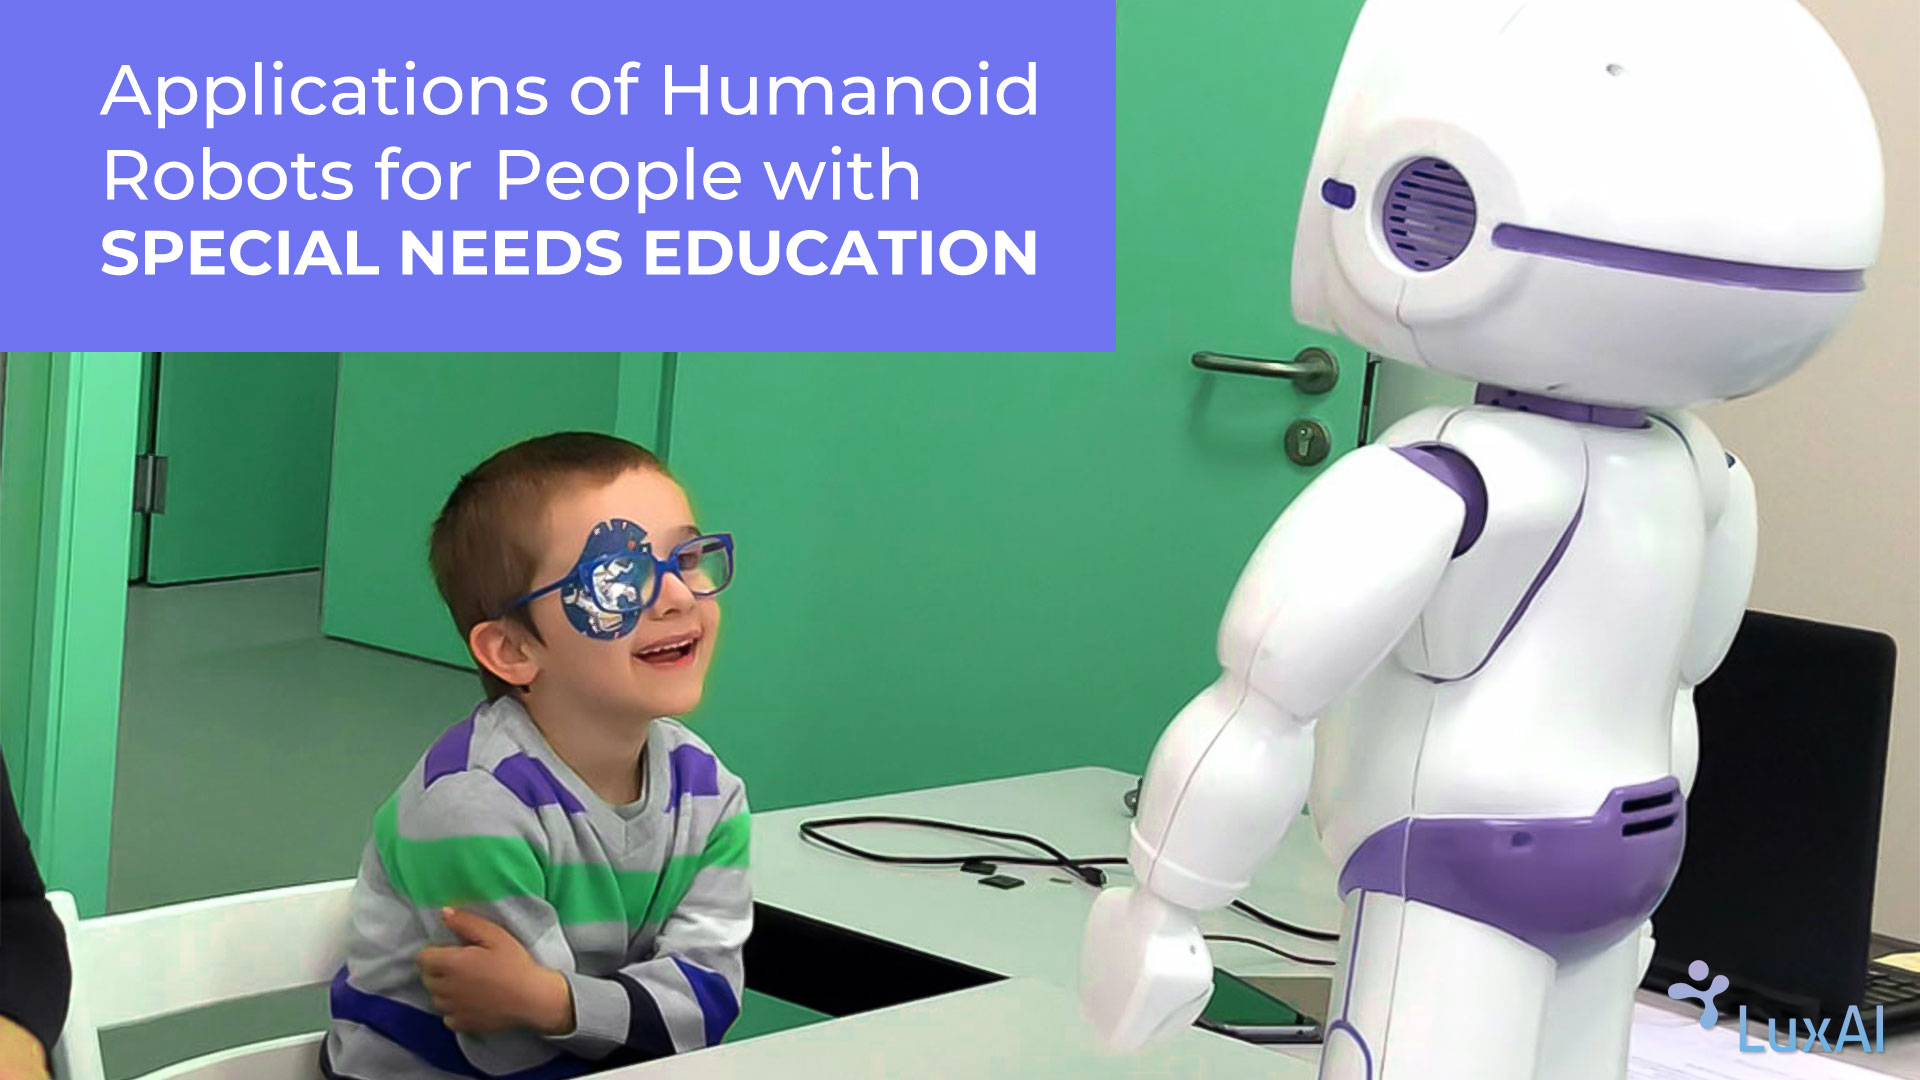 humanoid robots for people with special needs in education